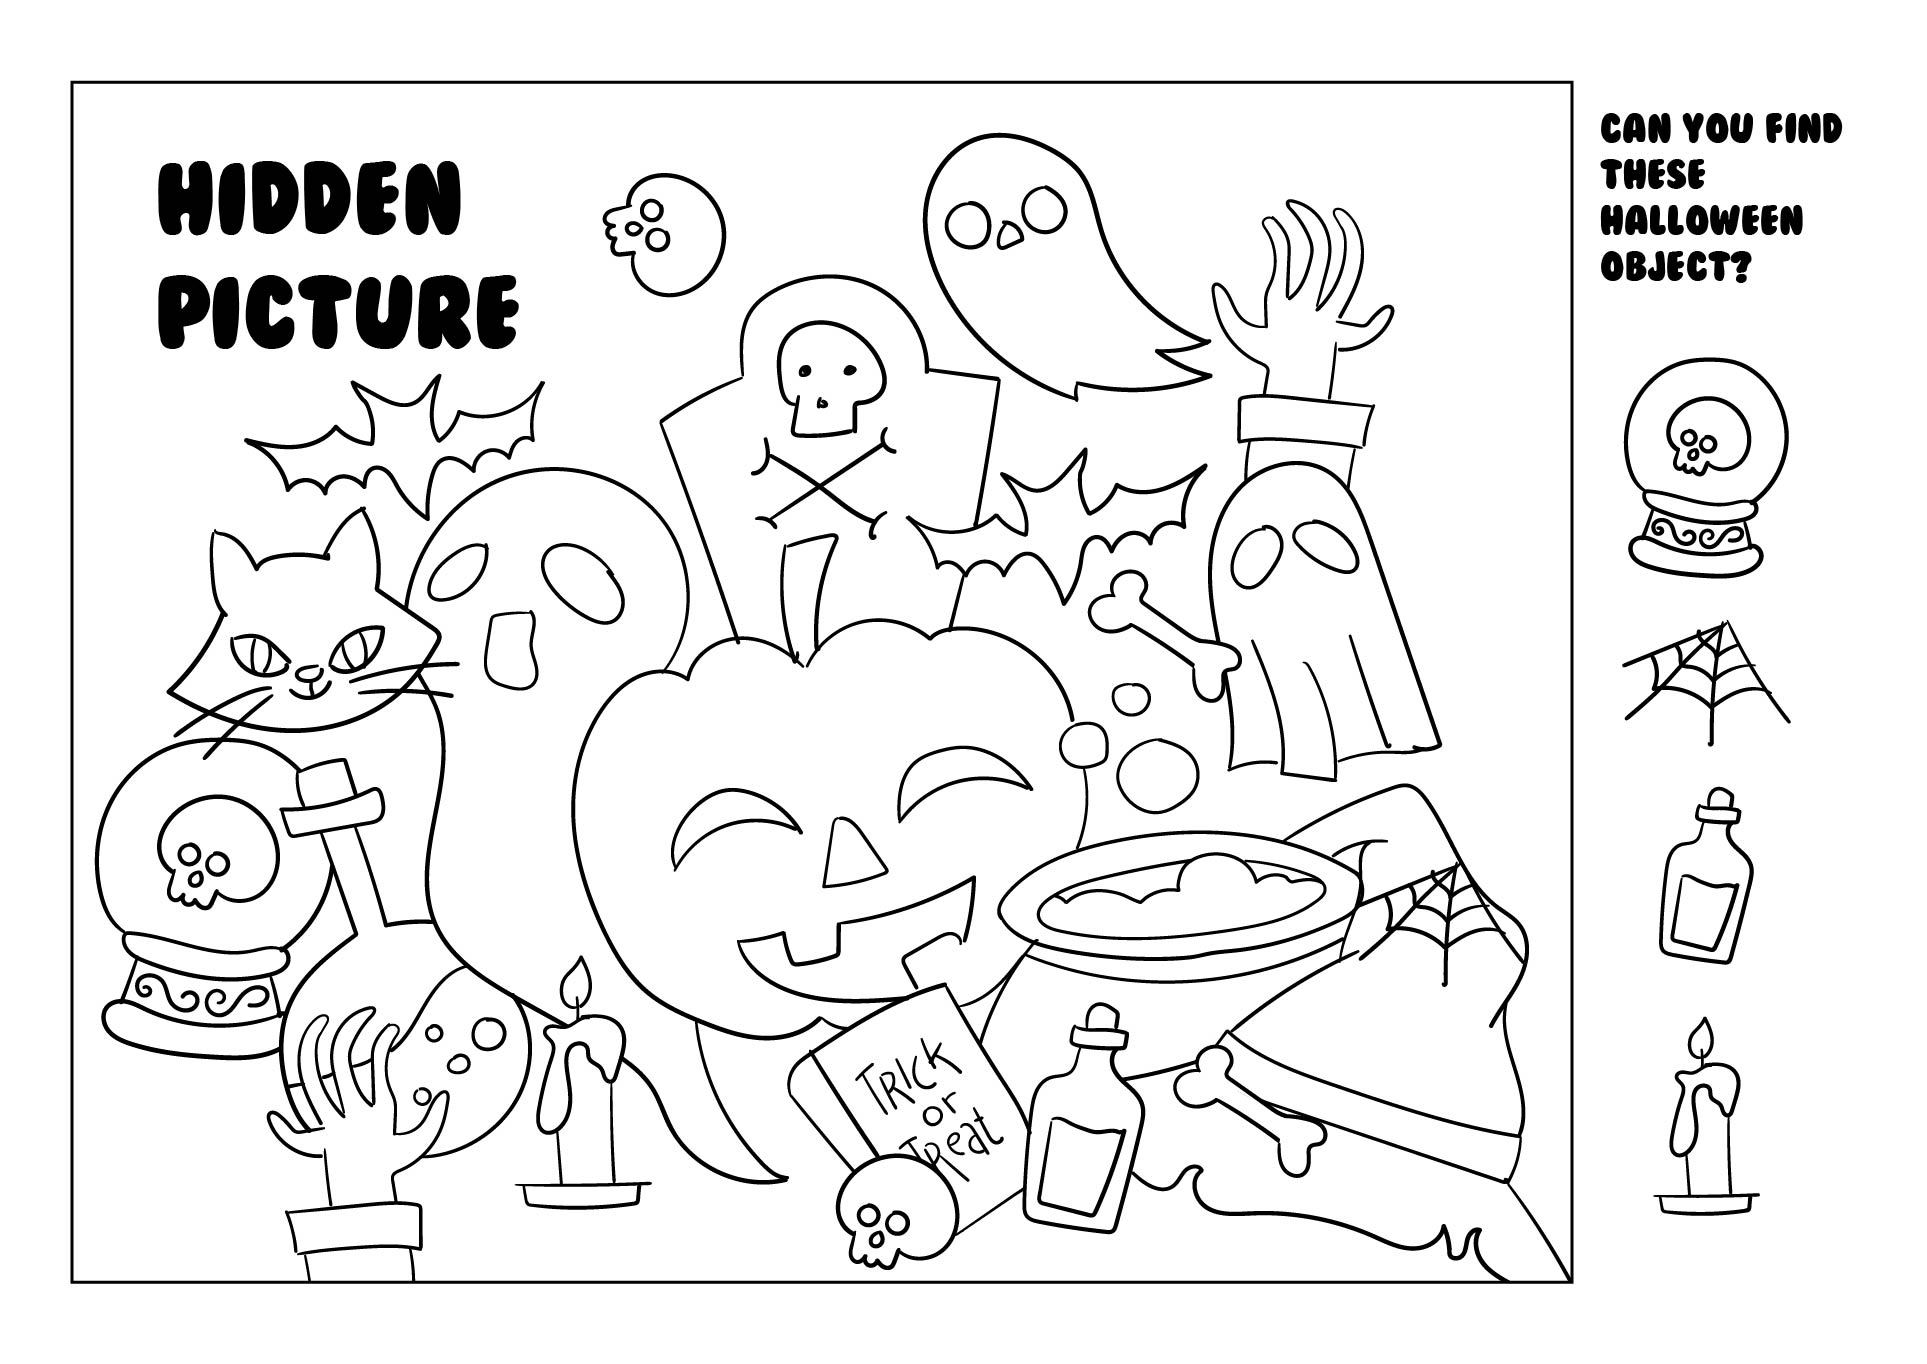 Halloween Hidden Picture Printables To Color